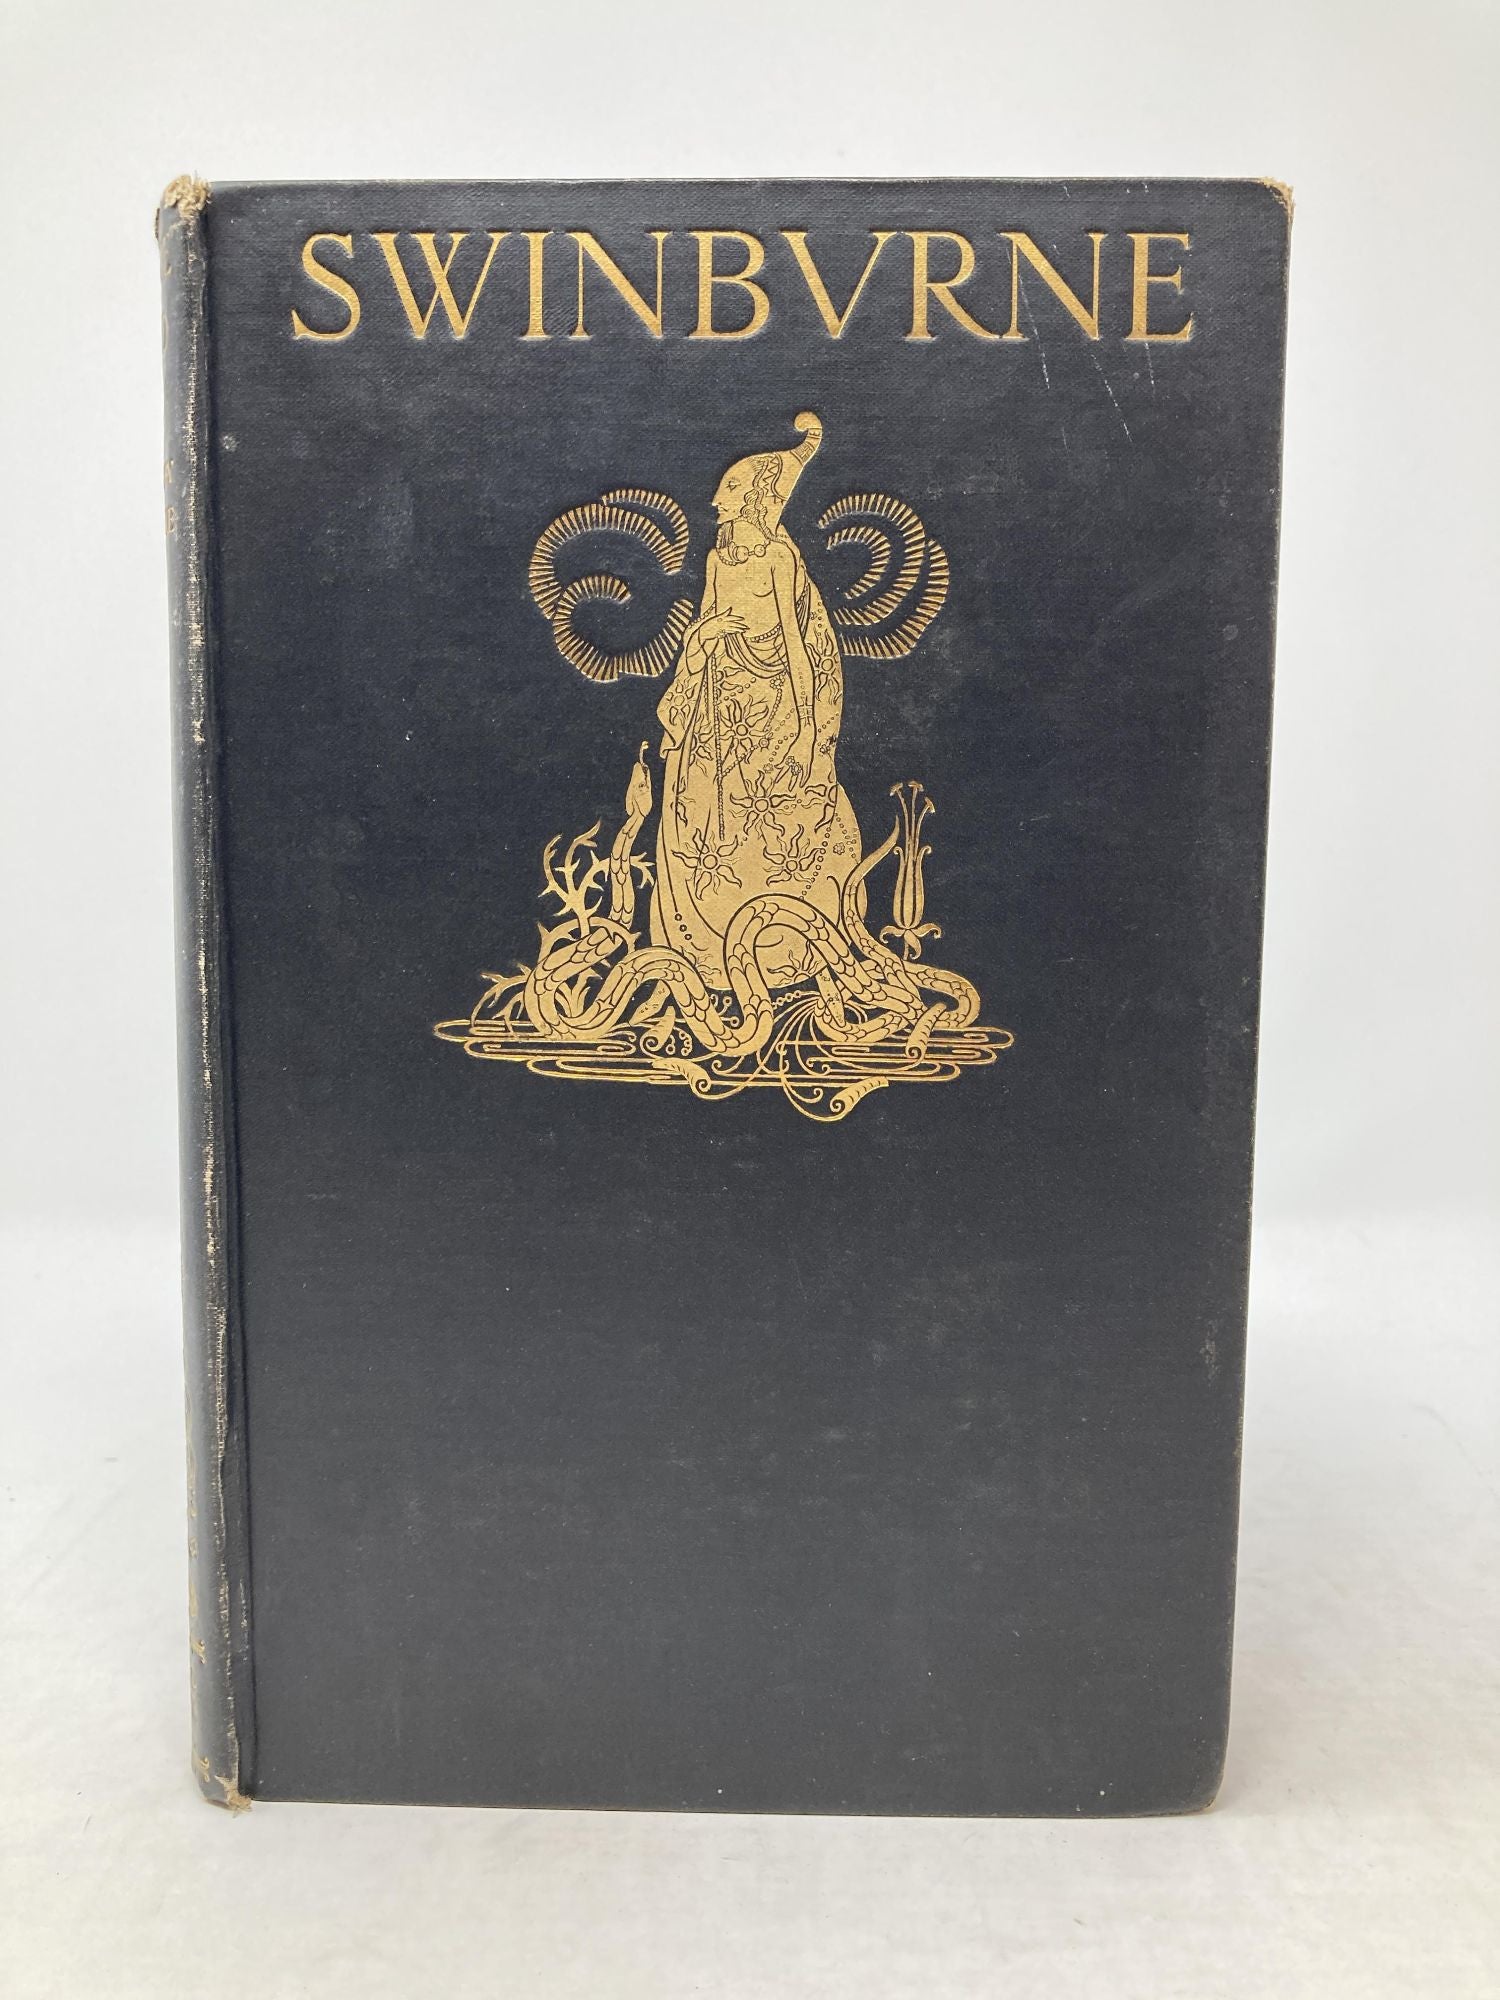 Swinburne, Algernon Charles - Selected Poems; with Illustrations and Decorations by Harry Clarke, and an Introduction by Humbert Wolfe